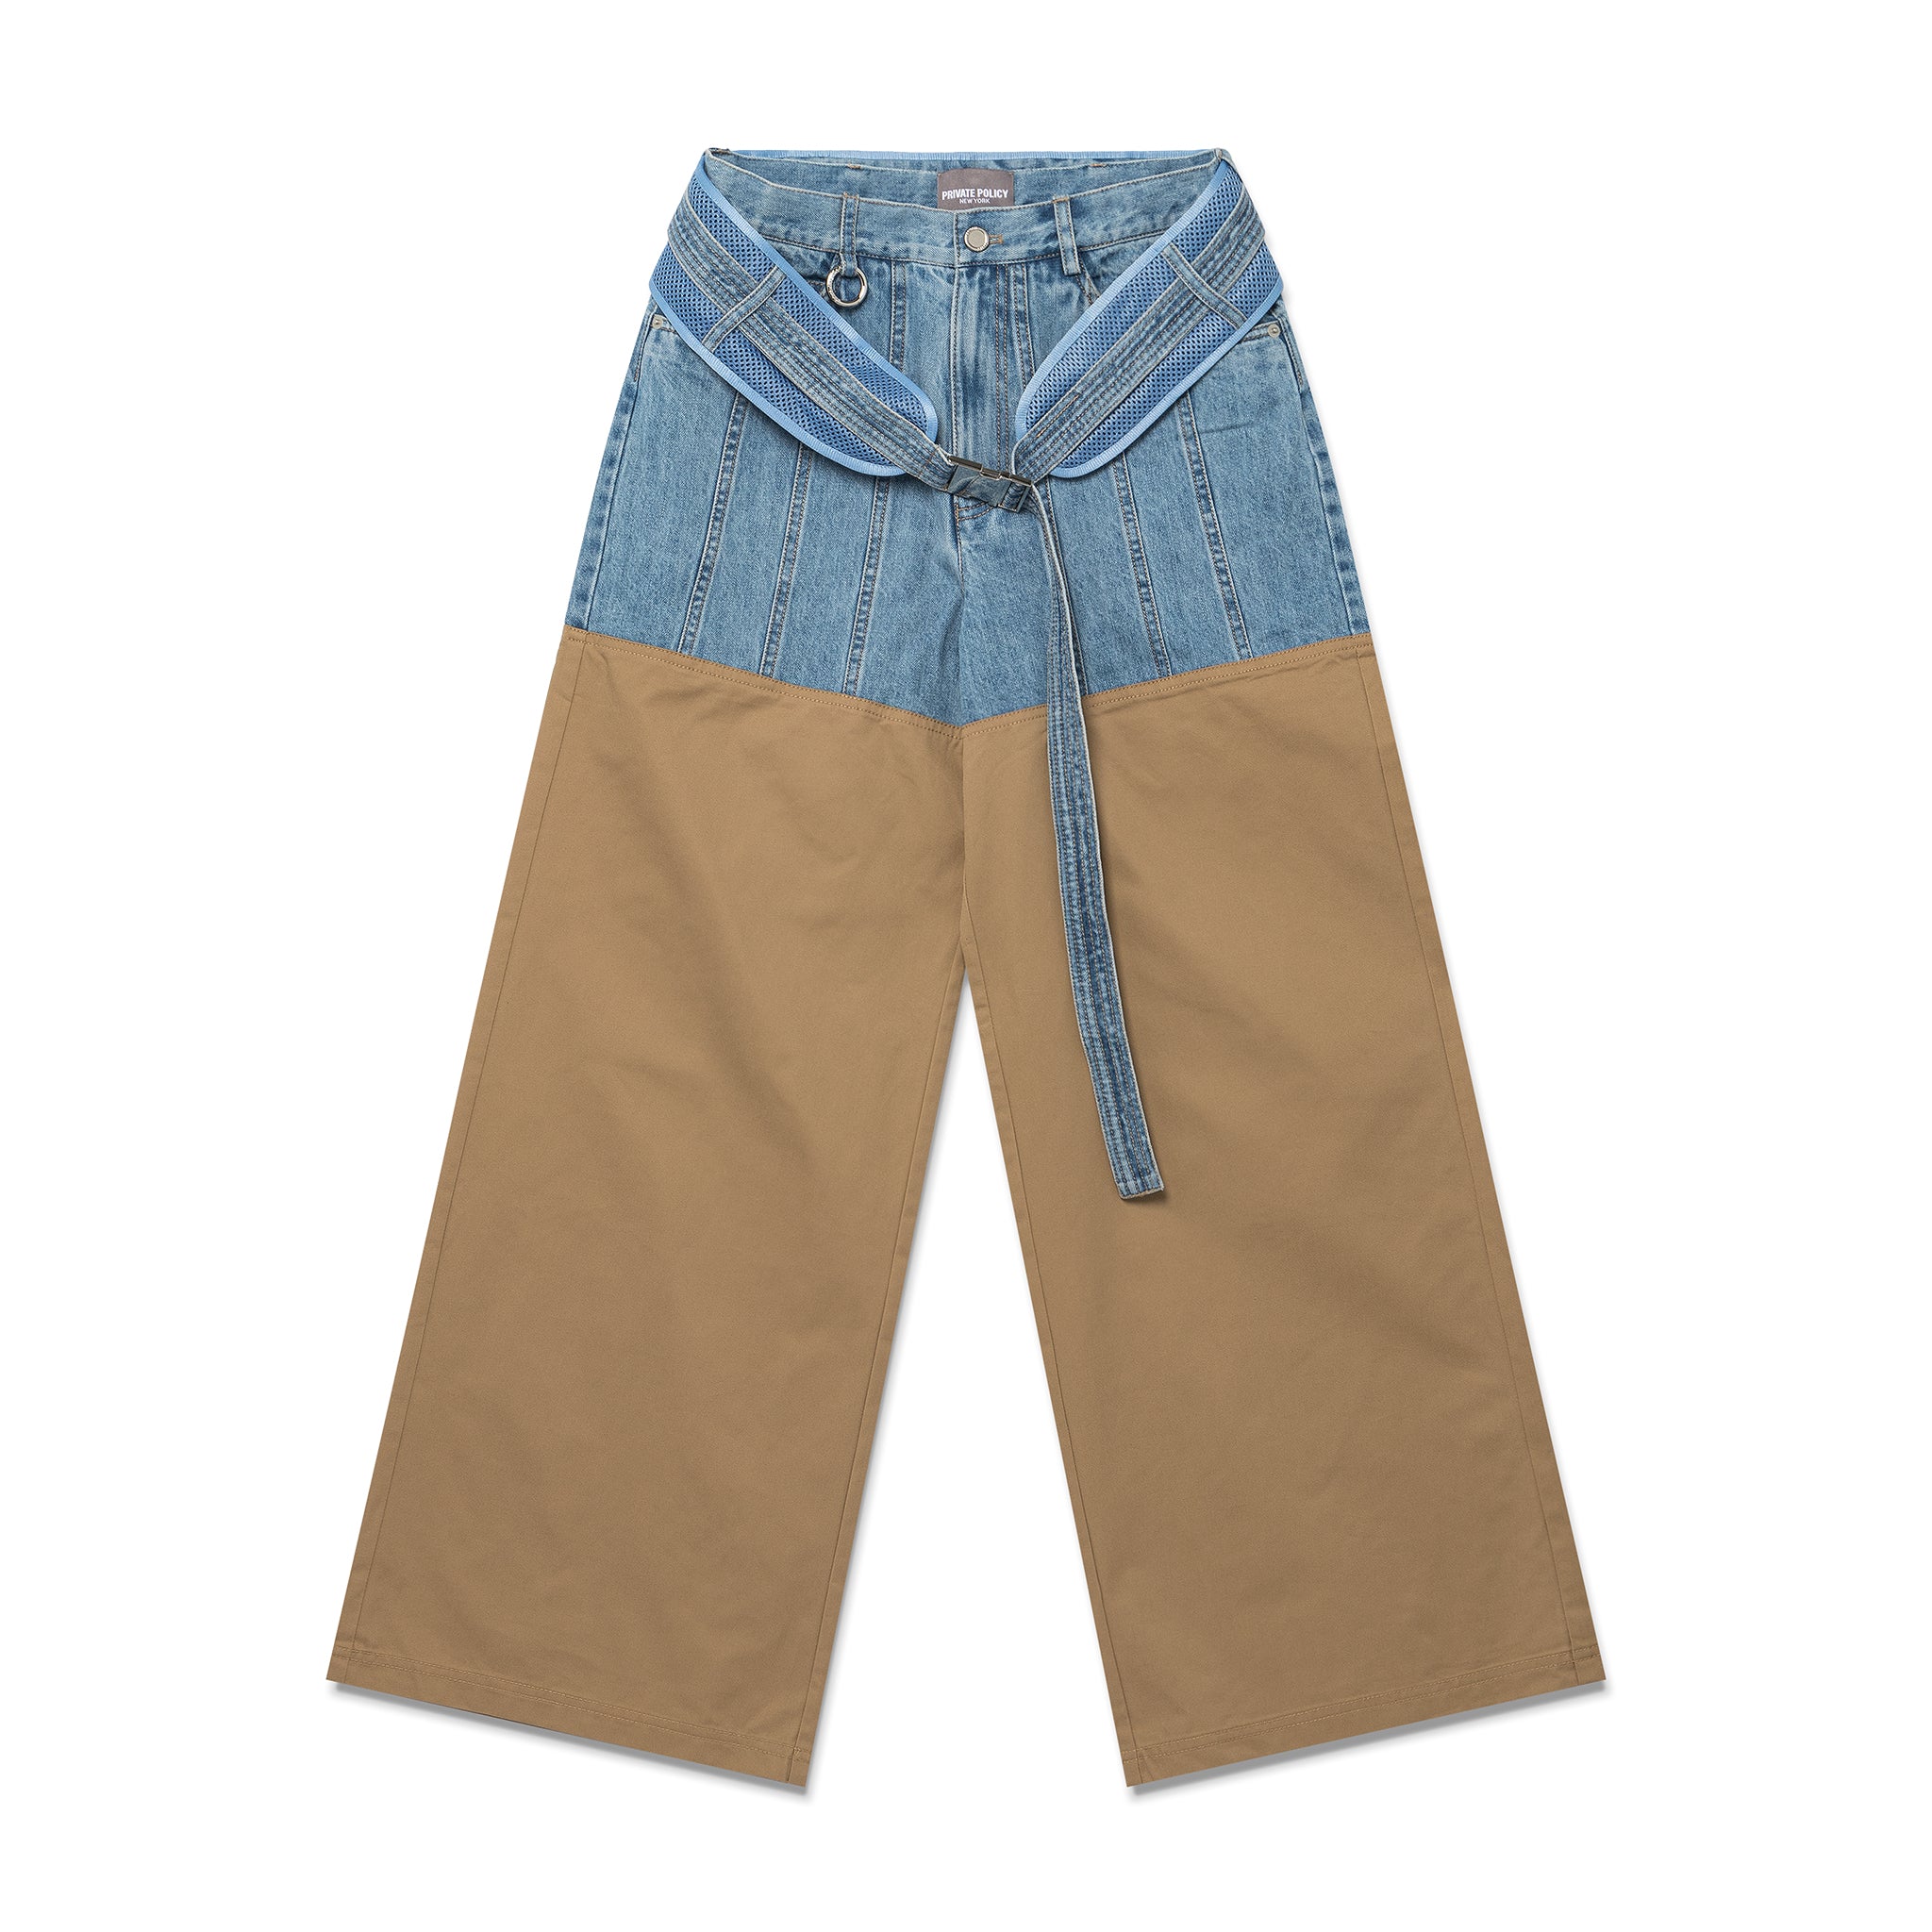 Buy Apparel DDSS Kids Boys and Girls Unisex Basic Shorts Bottom Half Pants  Bermuda Multi Colors Medium (5-7 Years) Combo Pack of 2 Online In India At  Discounted Prices